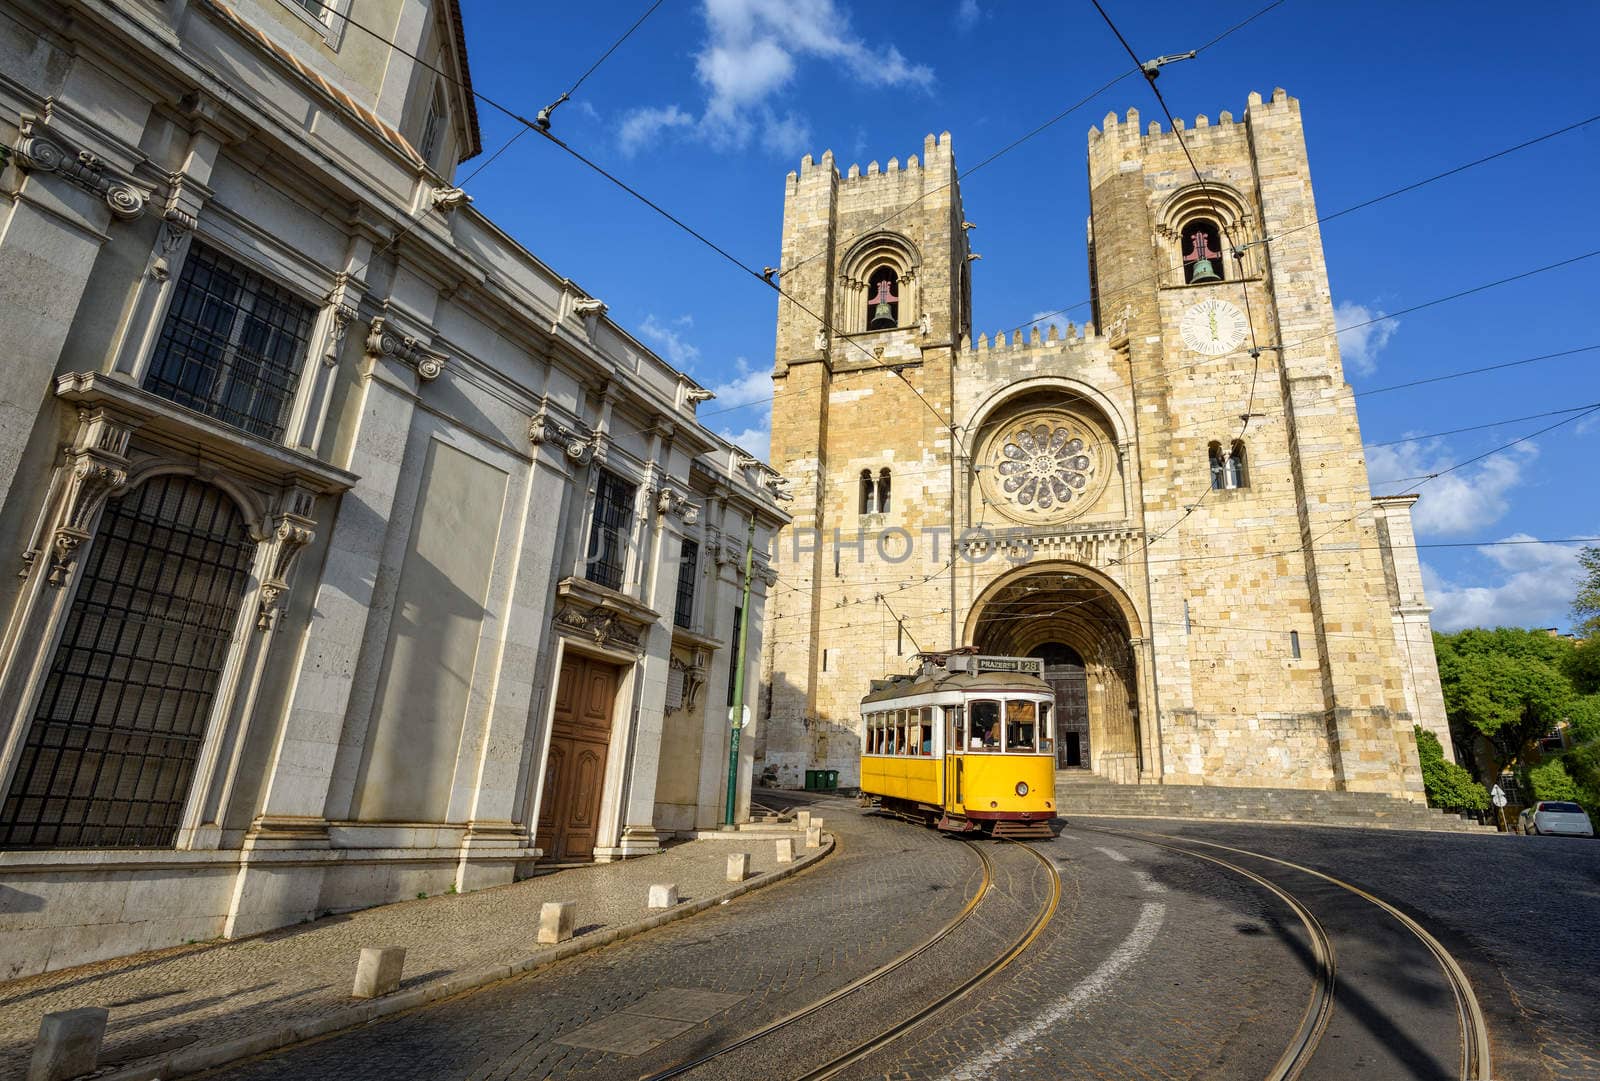 Old tram in front of cathedral in Lisbon, Portugal by GlobePhotos